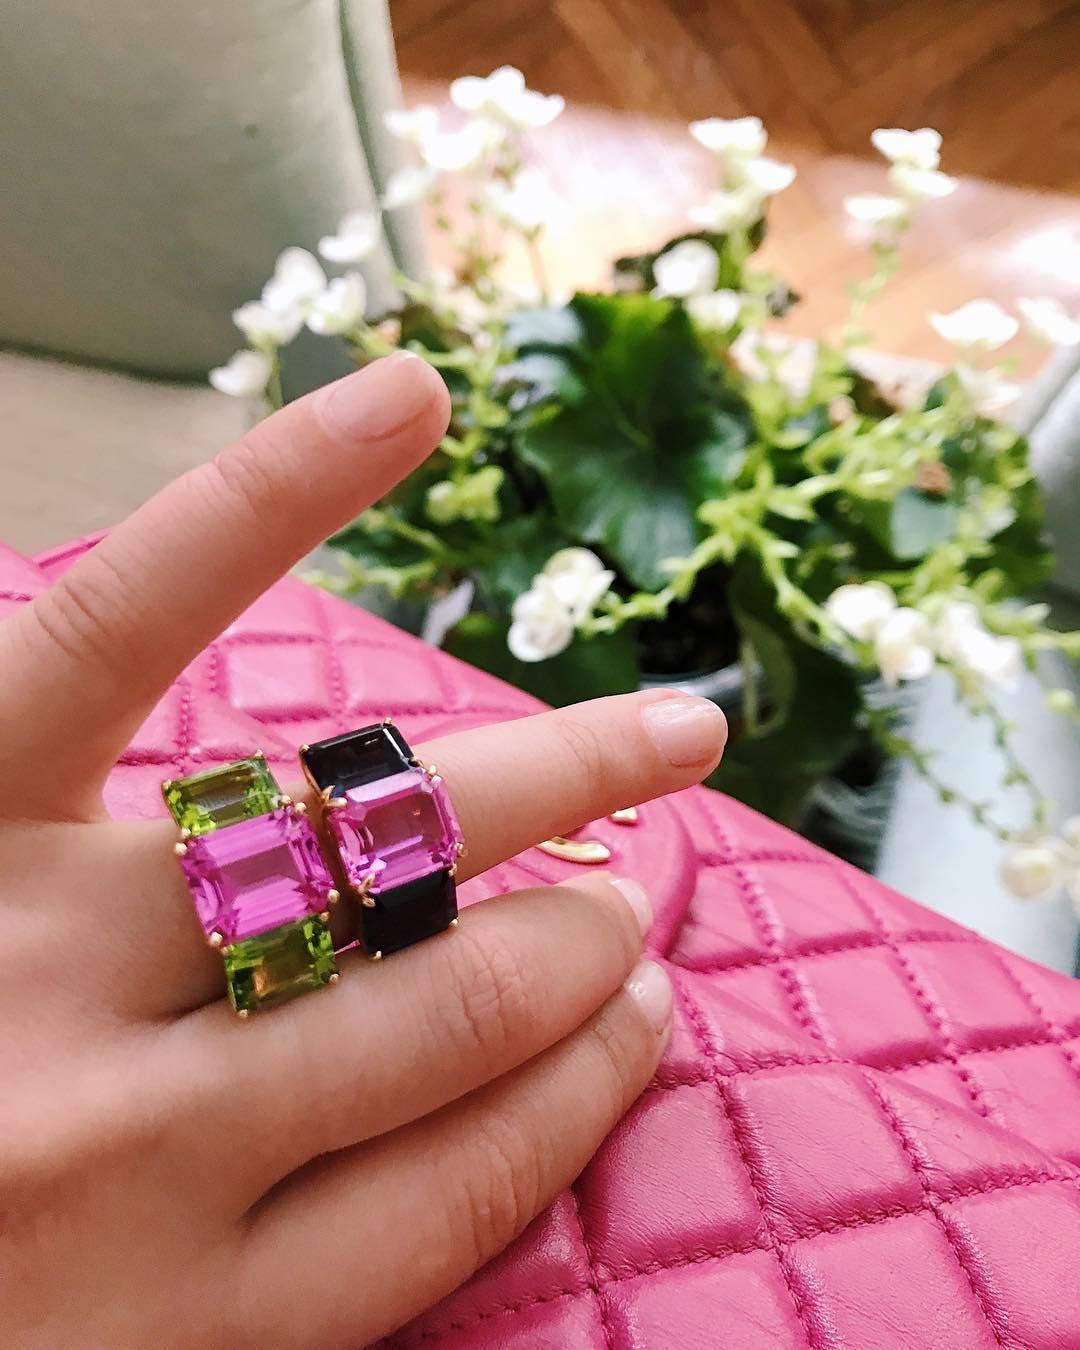 18kt yellow gold Emerald Cut ring with Pink Topaz (approximately 5 cts) and Blue Topaz (approximately 4 cts each).

The Ring measures approximately 1 